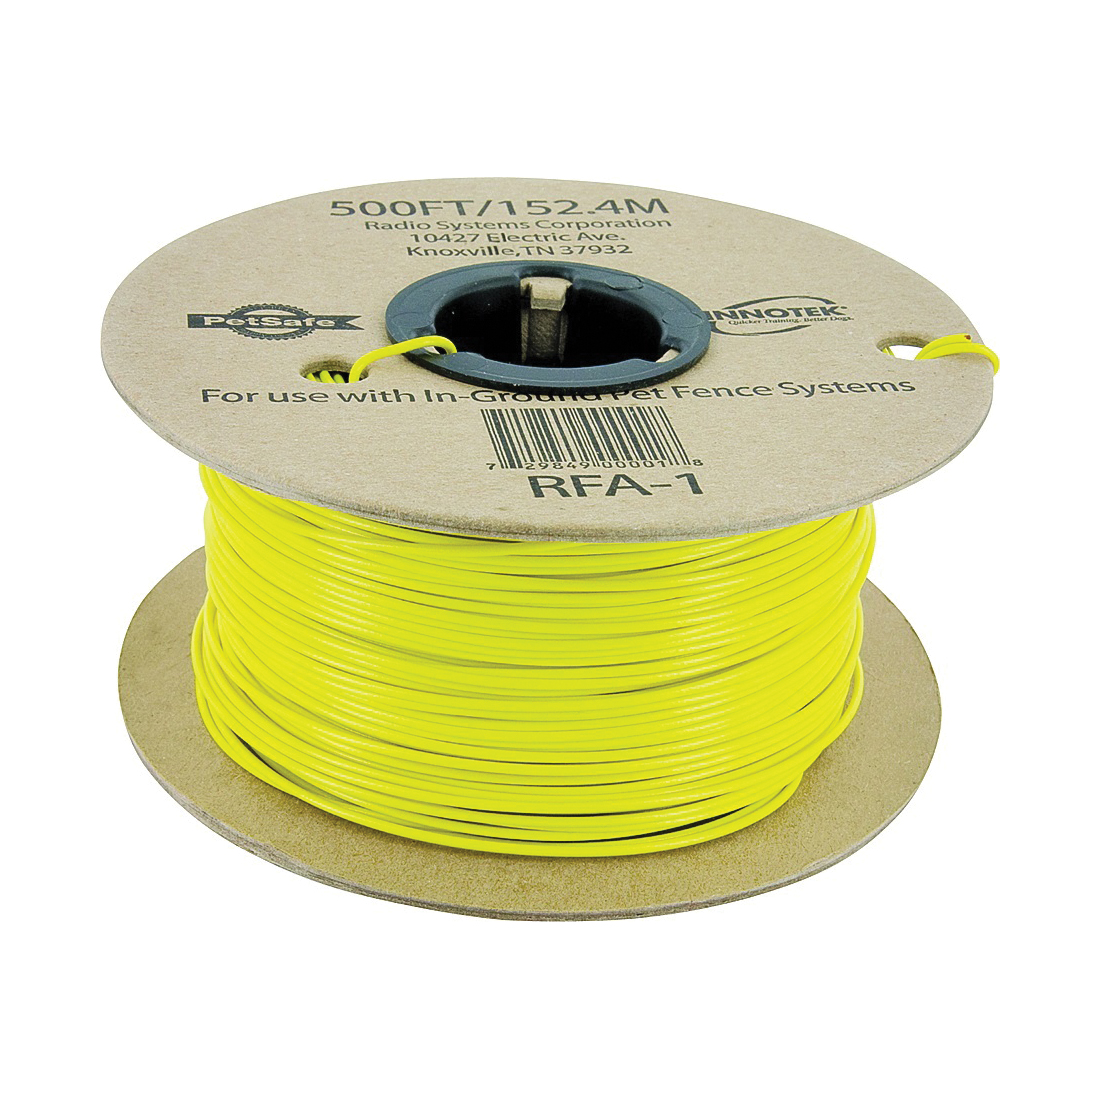 RFA-1 Fence Boundary Wire, 20 ga Wire, Yellow, 500 ft L